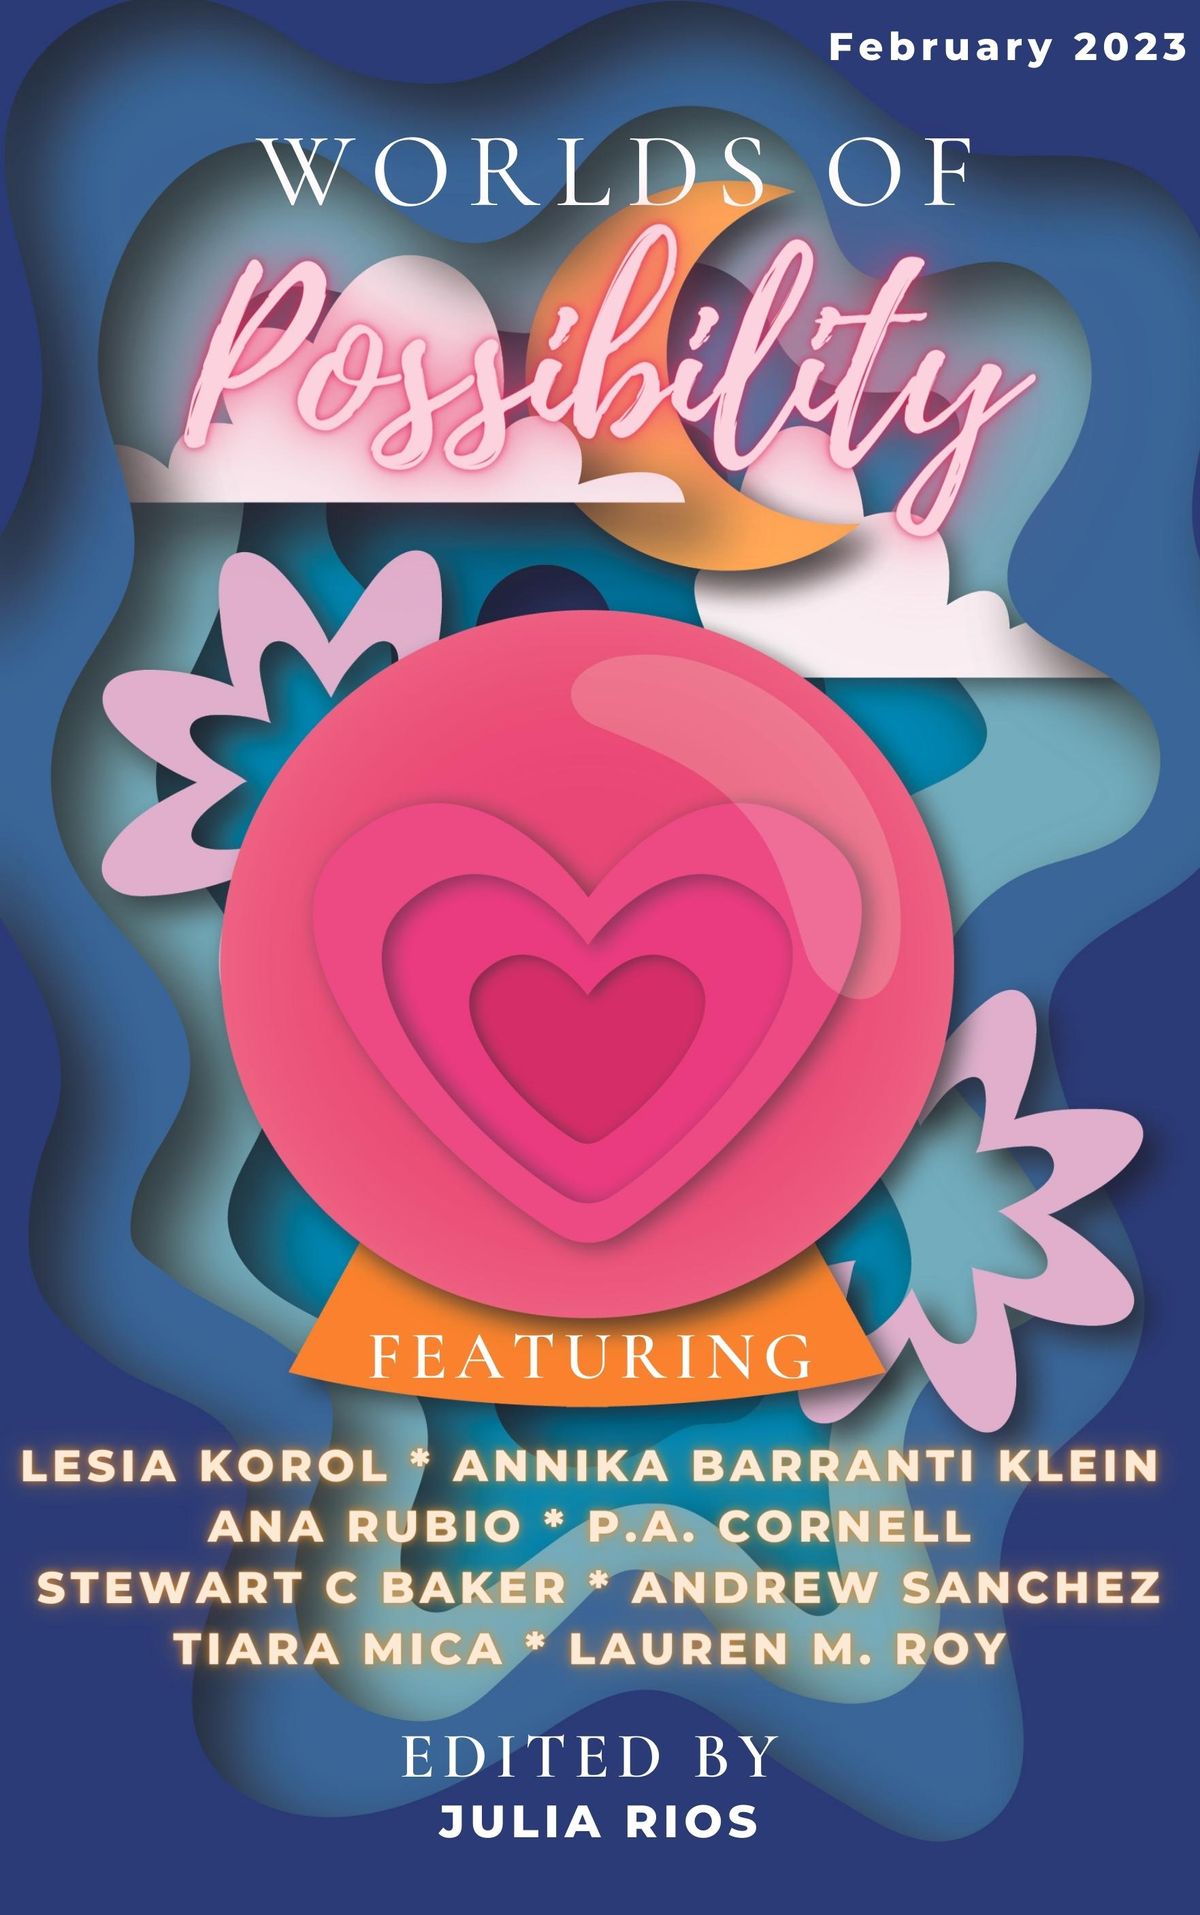 Introducing the February 2023 Issue of Worlds of Possibility